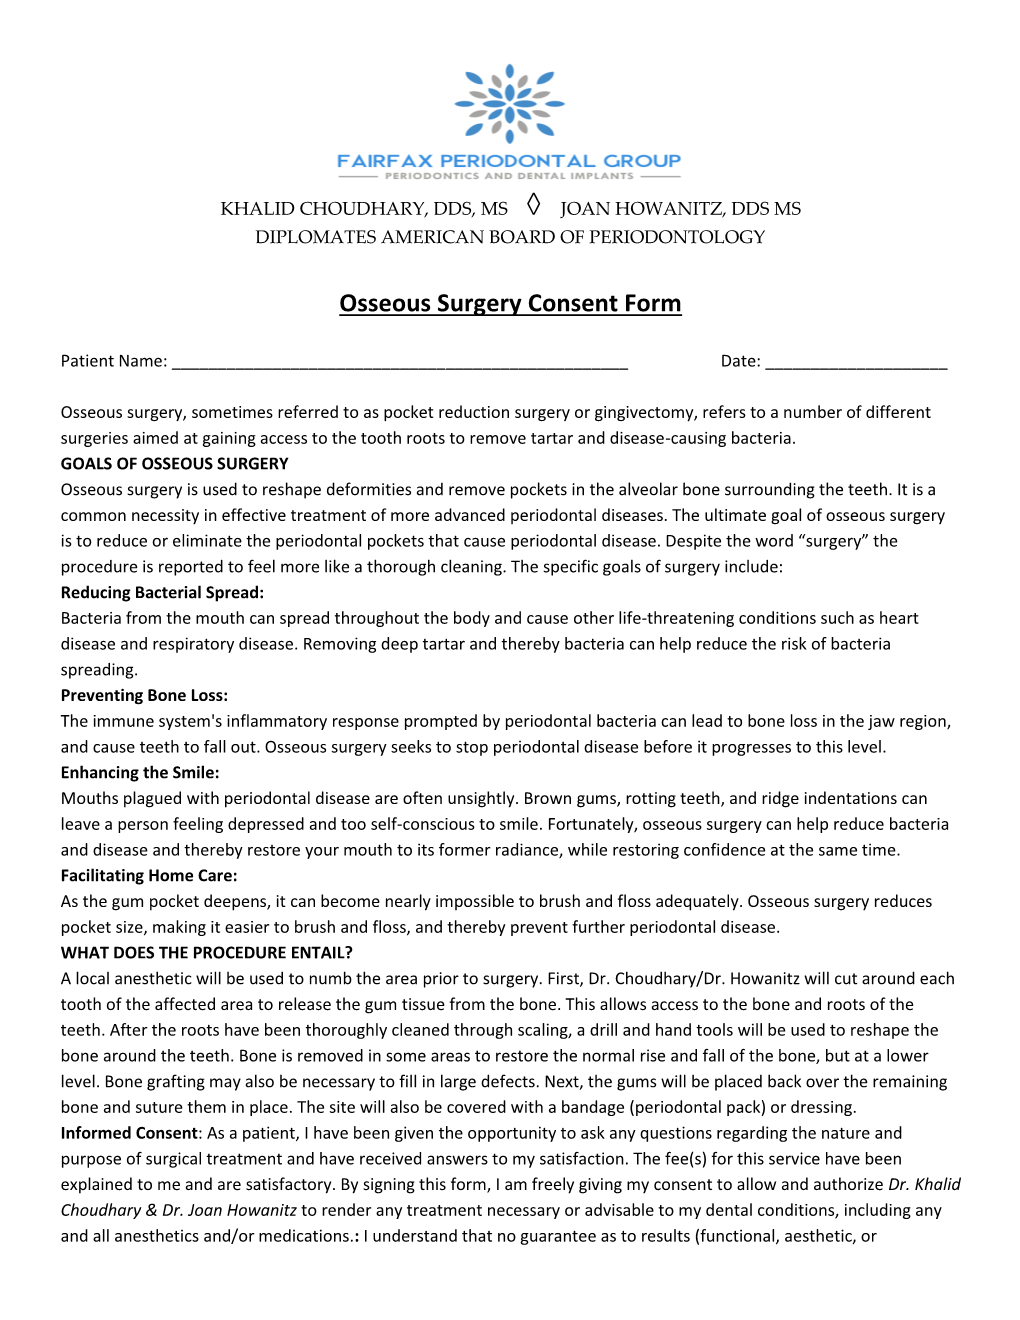 Osseous Surgery Consent Form